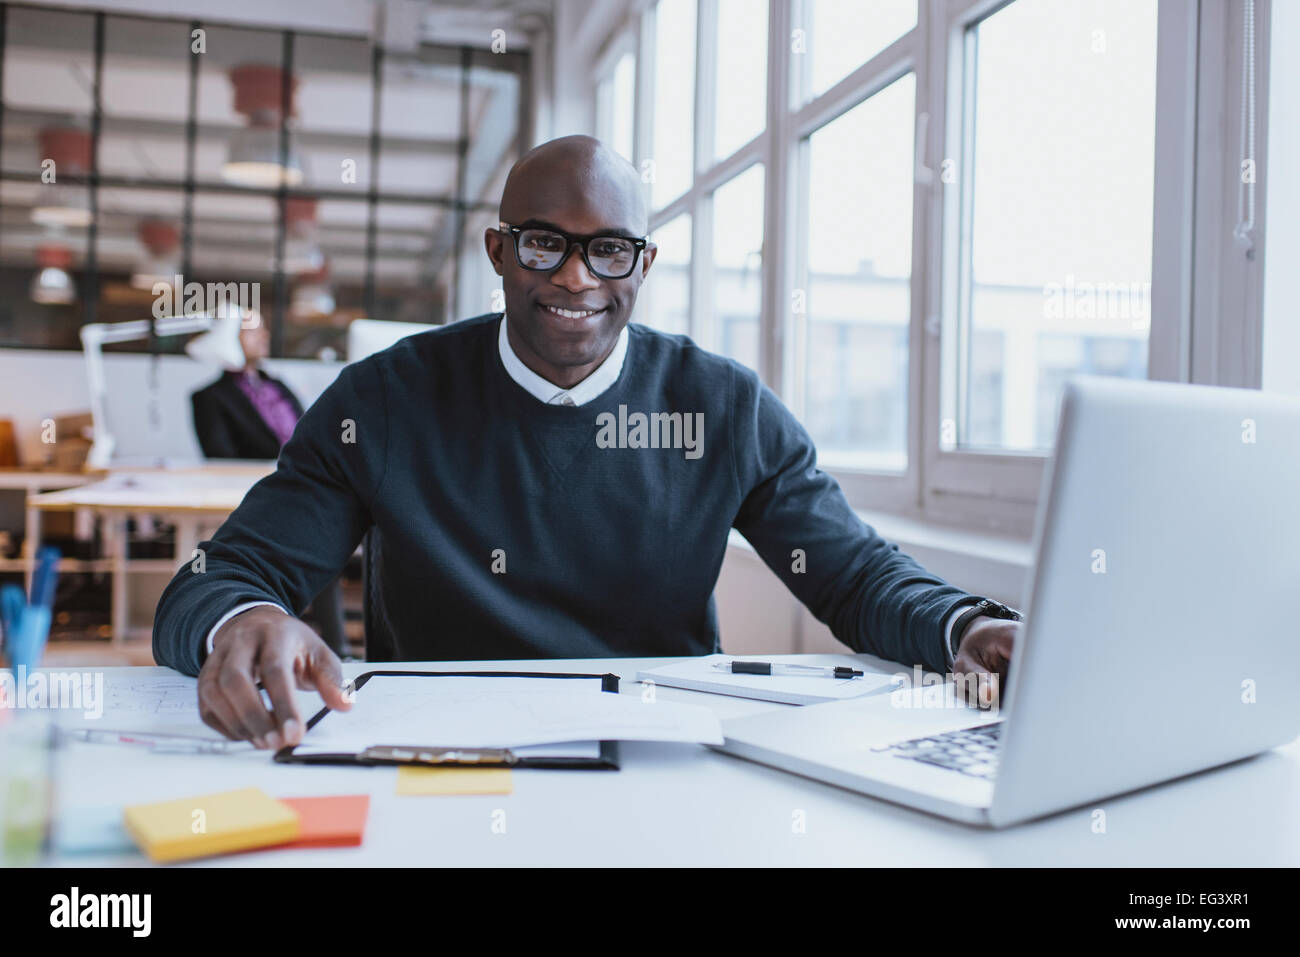 Portrait of confident young man at his desk with laptop doing paperwork. Happy african man looking at camera while at work. Stock Photo